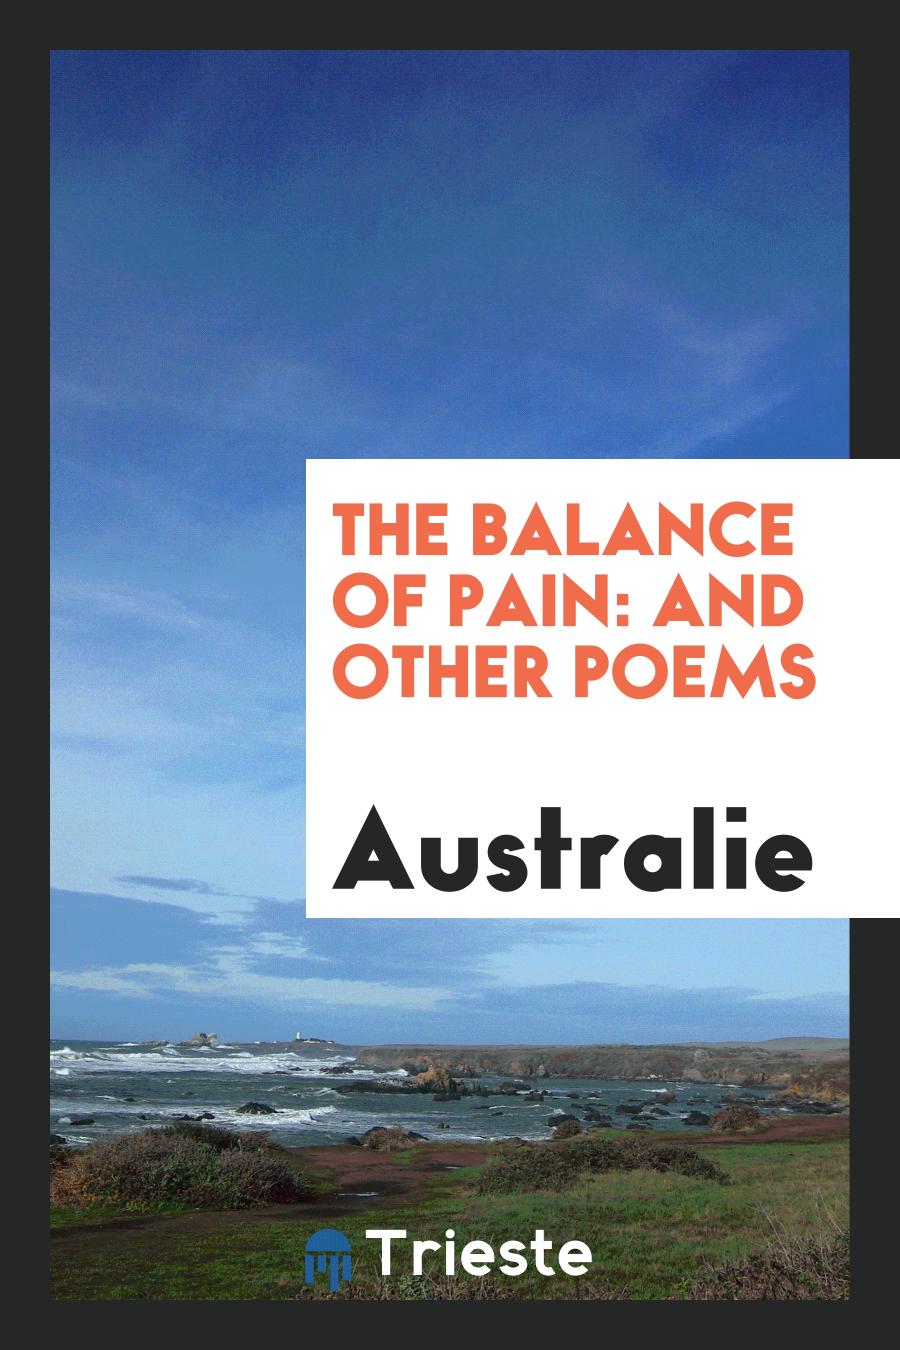 The Balance of Pain: And Other Poems